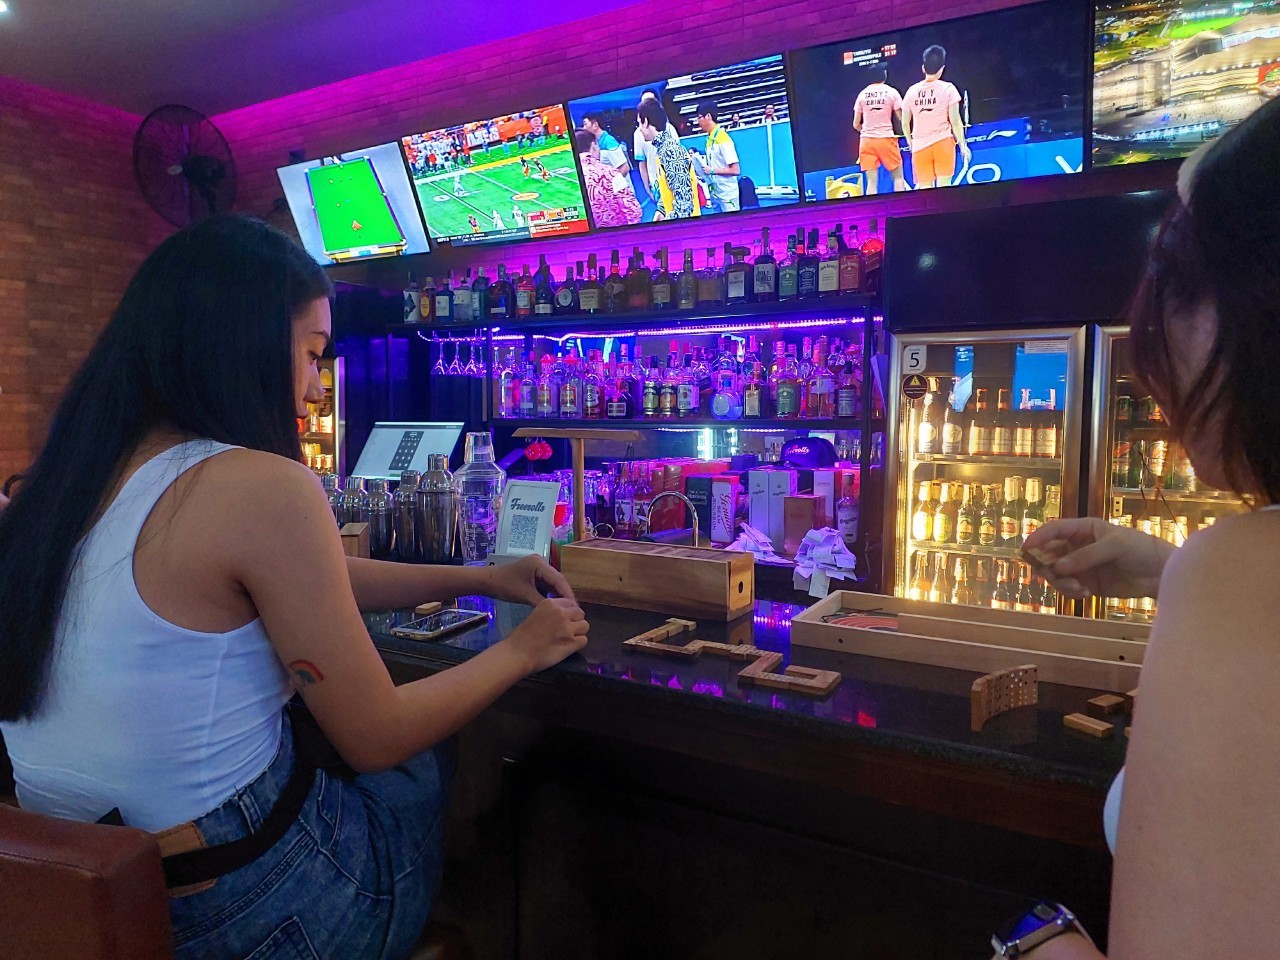 Where can I watch Sports in Chiang Mai?